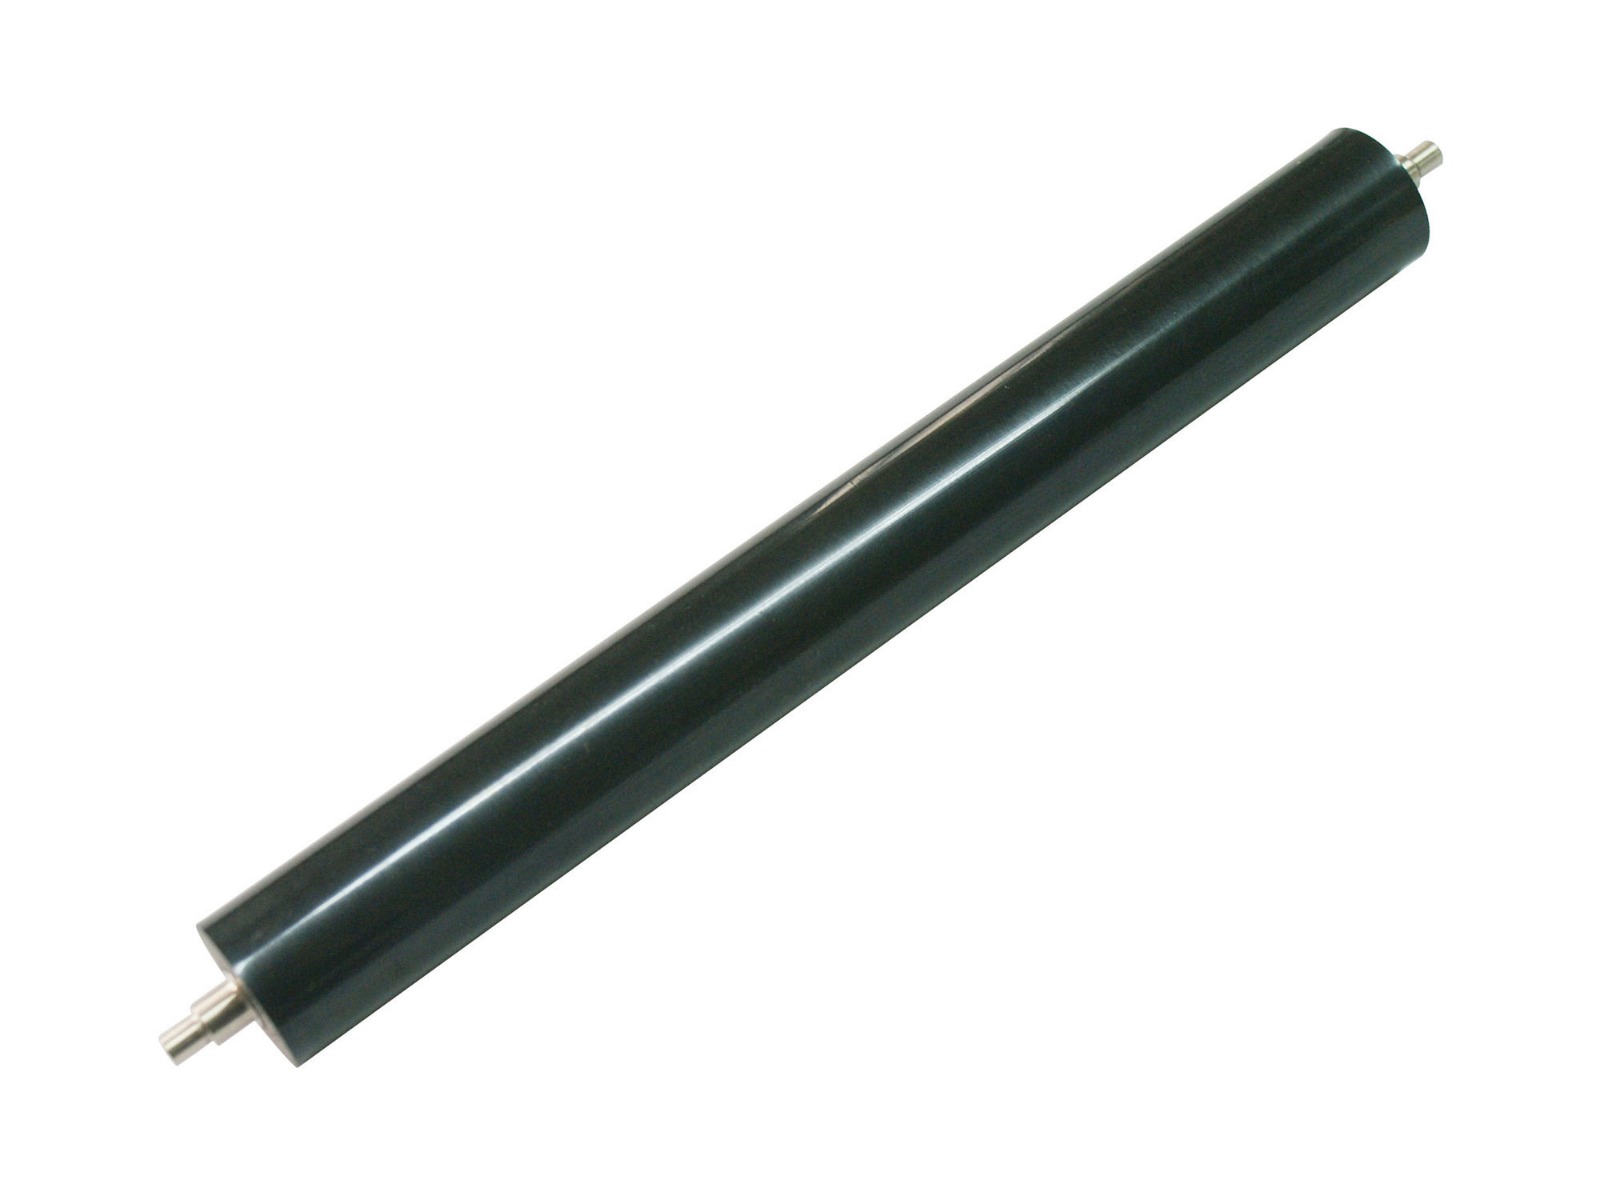 ДОЛНА РОЛКА (LOWER SLEEVED ROLLER) (Pressure Roller) ЗА KONICA MINOLTA Page Pro 1300/1350W/EPSON EPL 6200 - P№ 4136-5502-01 - CE 